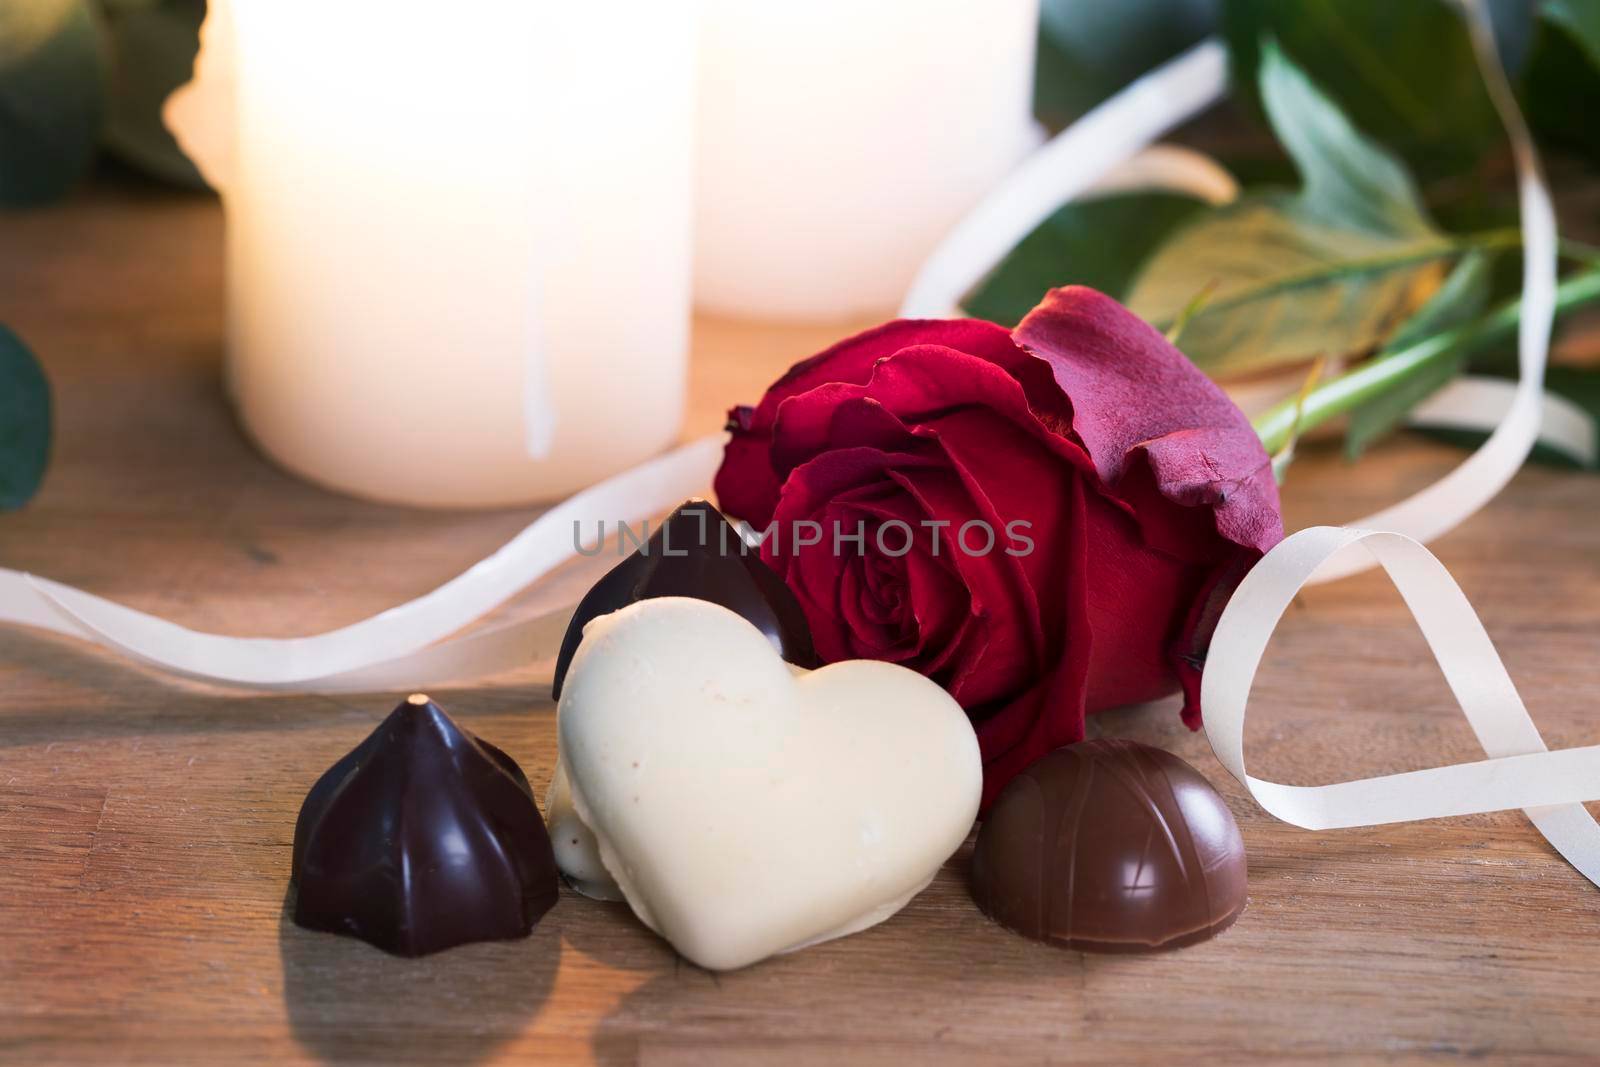 Chocolates and a red rose for your valentine.